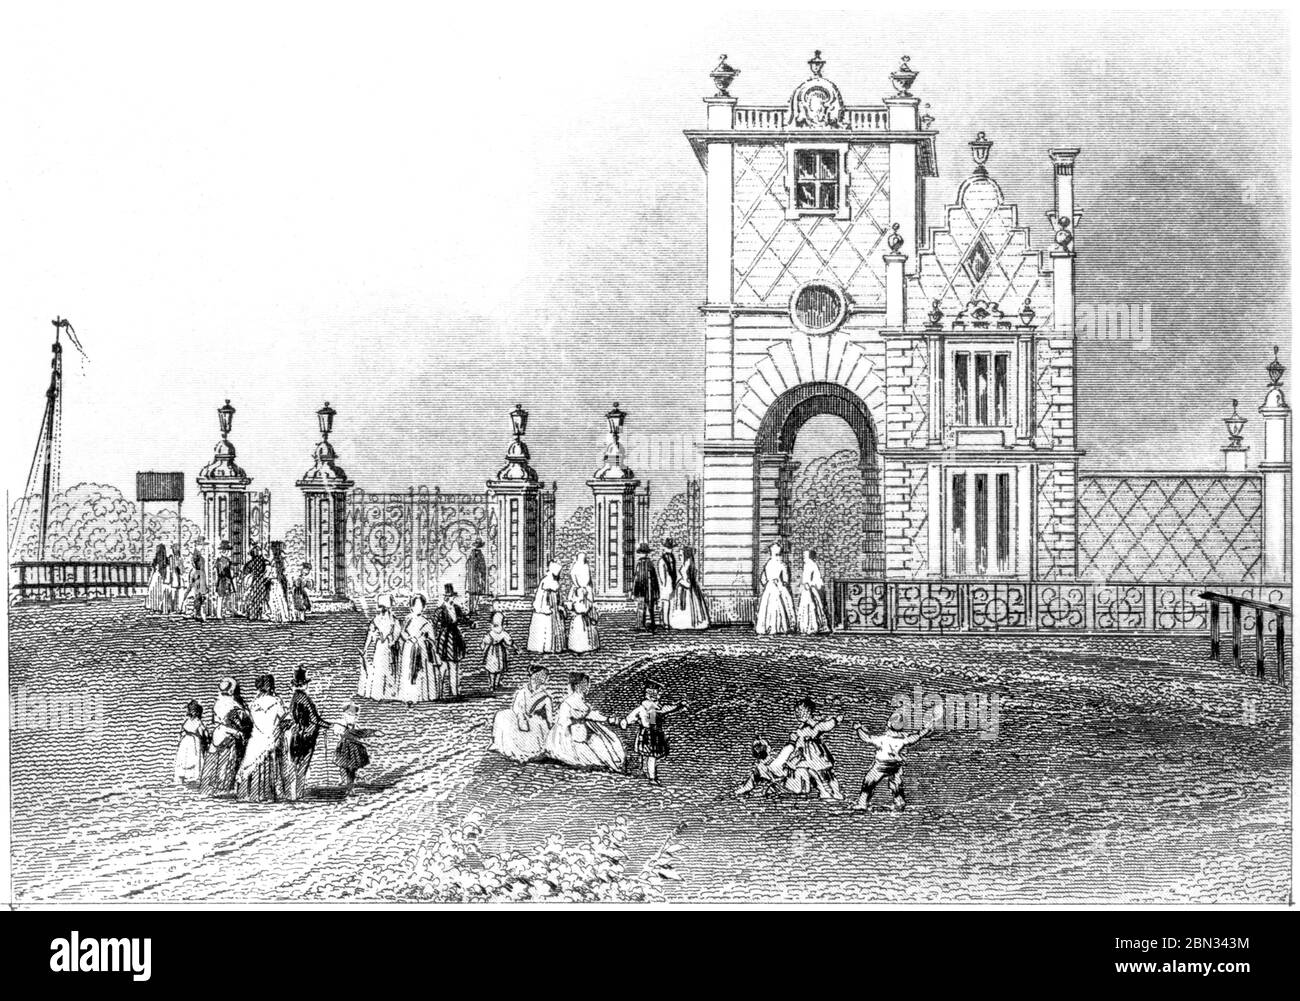 An engraving of New Lodge Victoria Park Bonners Fields scanned at high resolution from a book printed in 1851.  Believed copyright free. Stock Photo